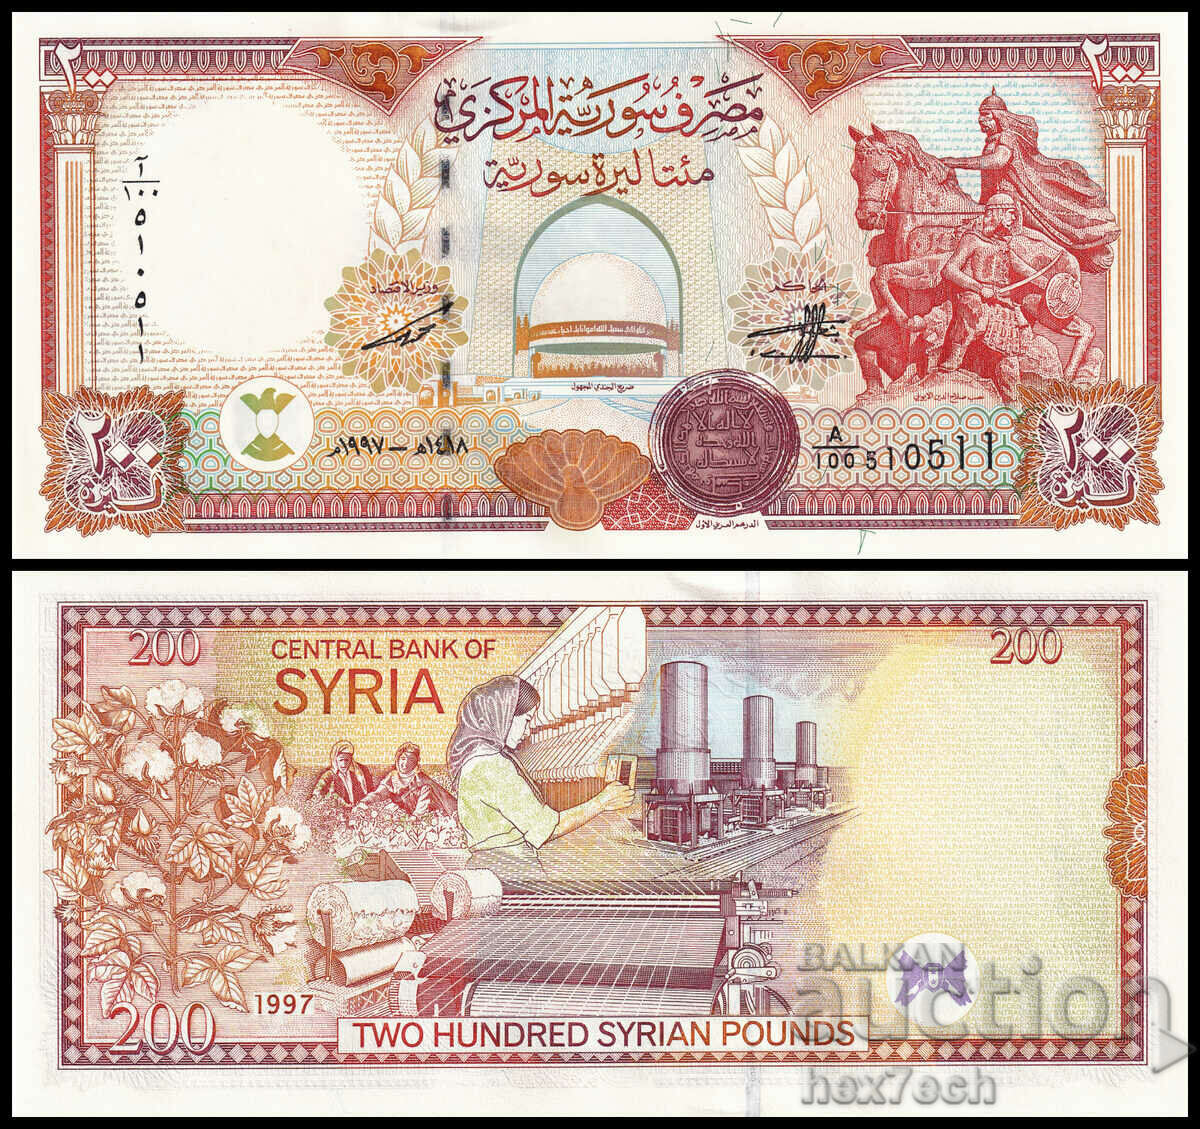 ❤️ ⭐ Syria 1997 200 pounds UNC new ⭐ ❤️